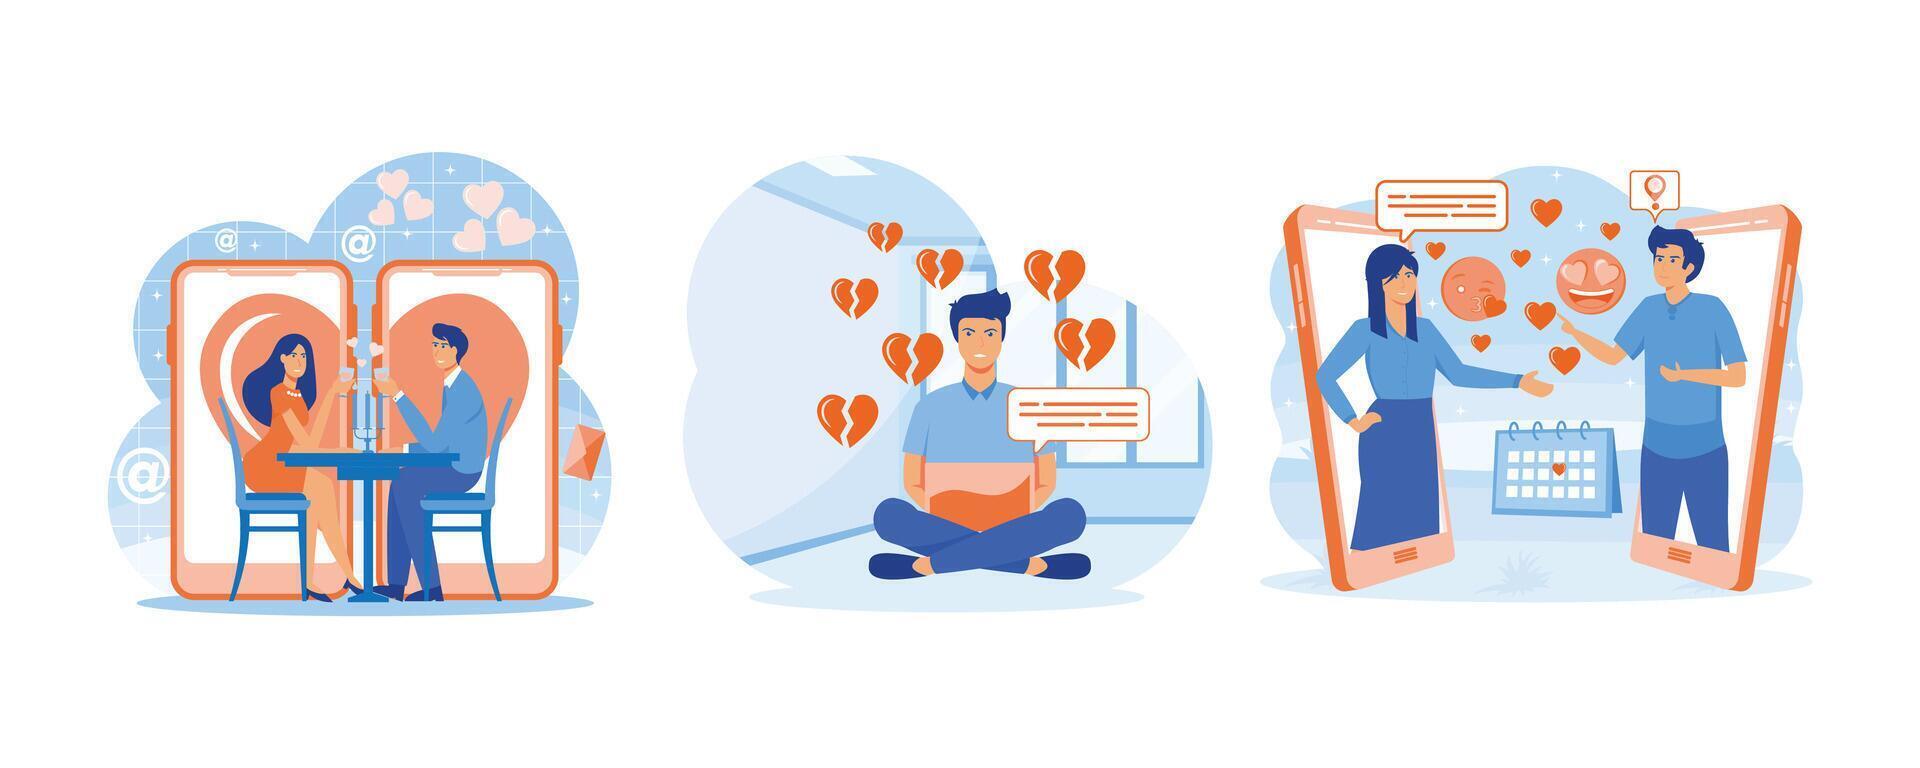 Online dating concept. Aggressive man sits cross-legged with a cell phone with broken hearts. Texting messages chatting via online video call in mobile phone dating app. vector